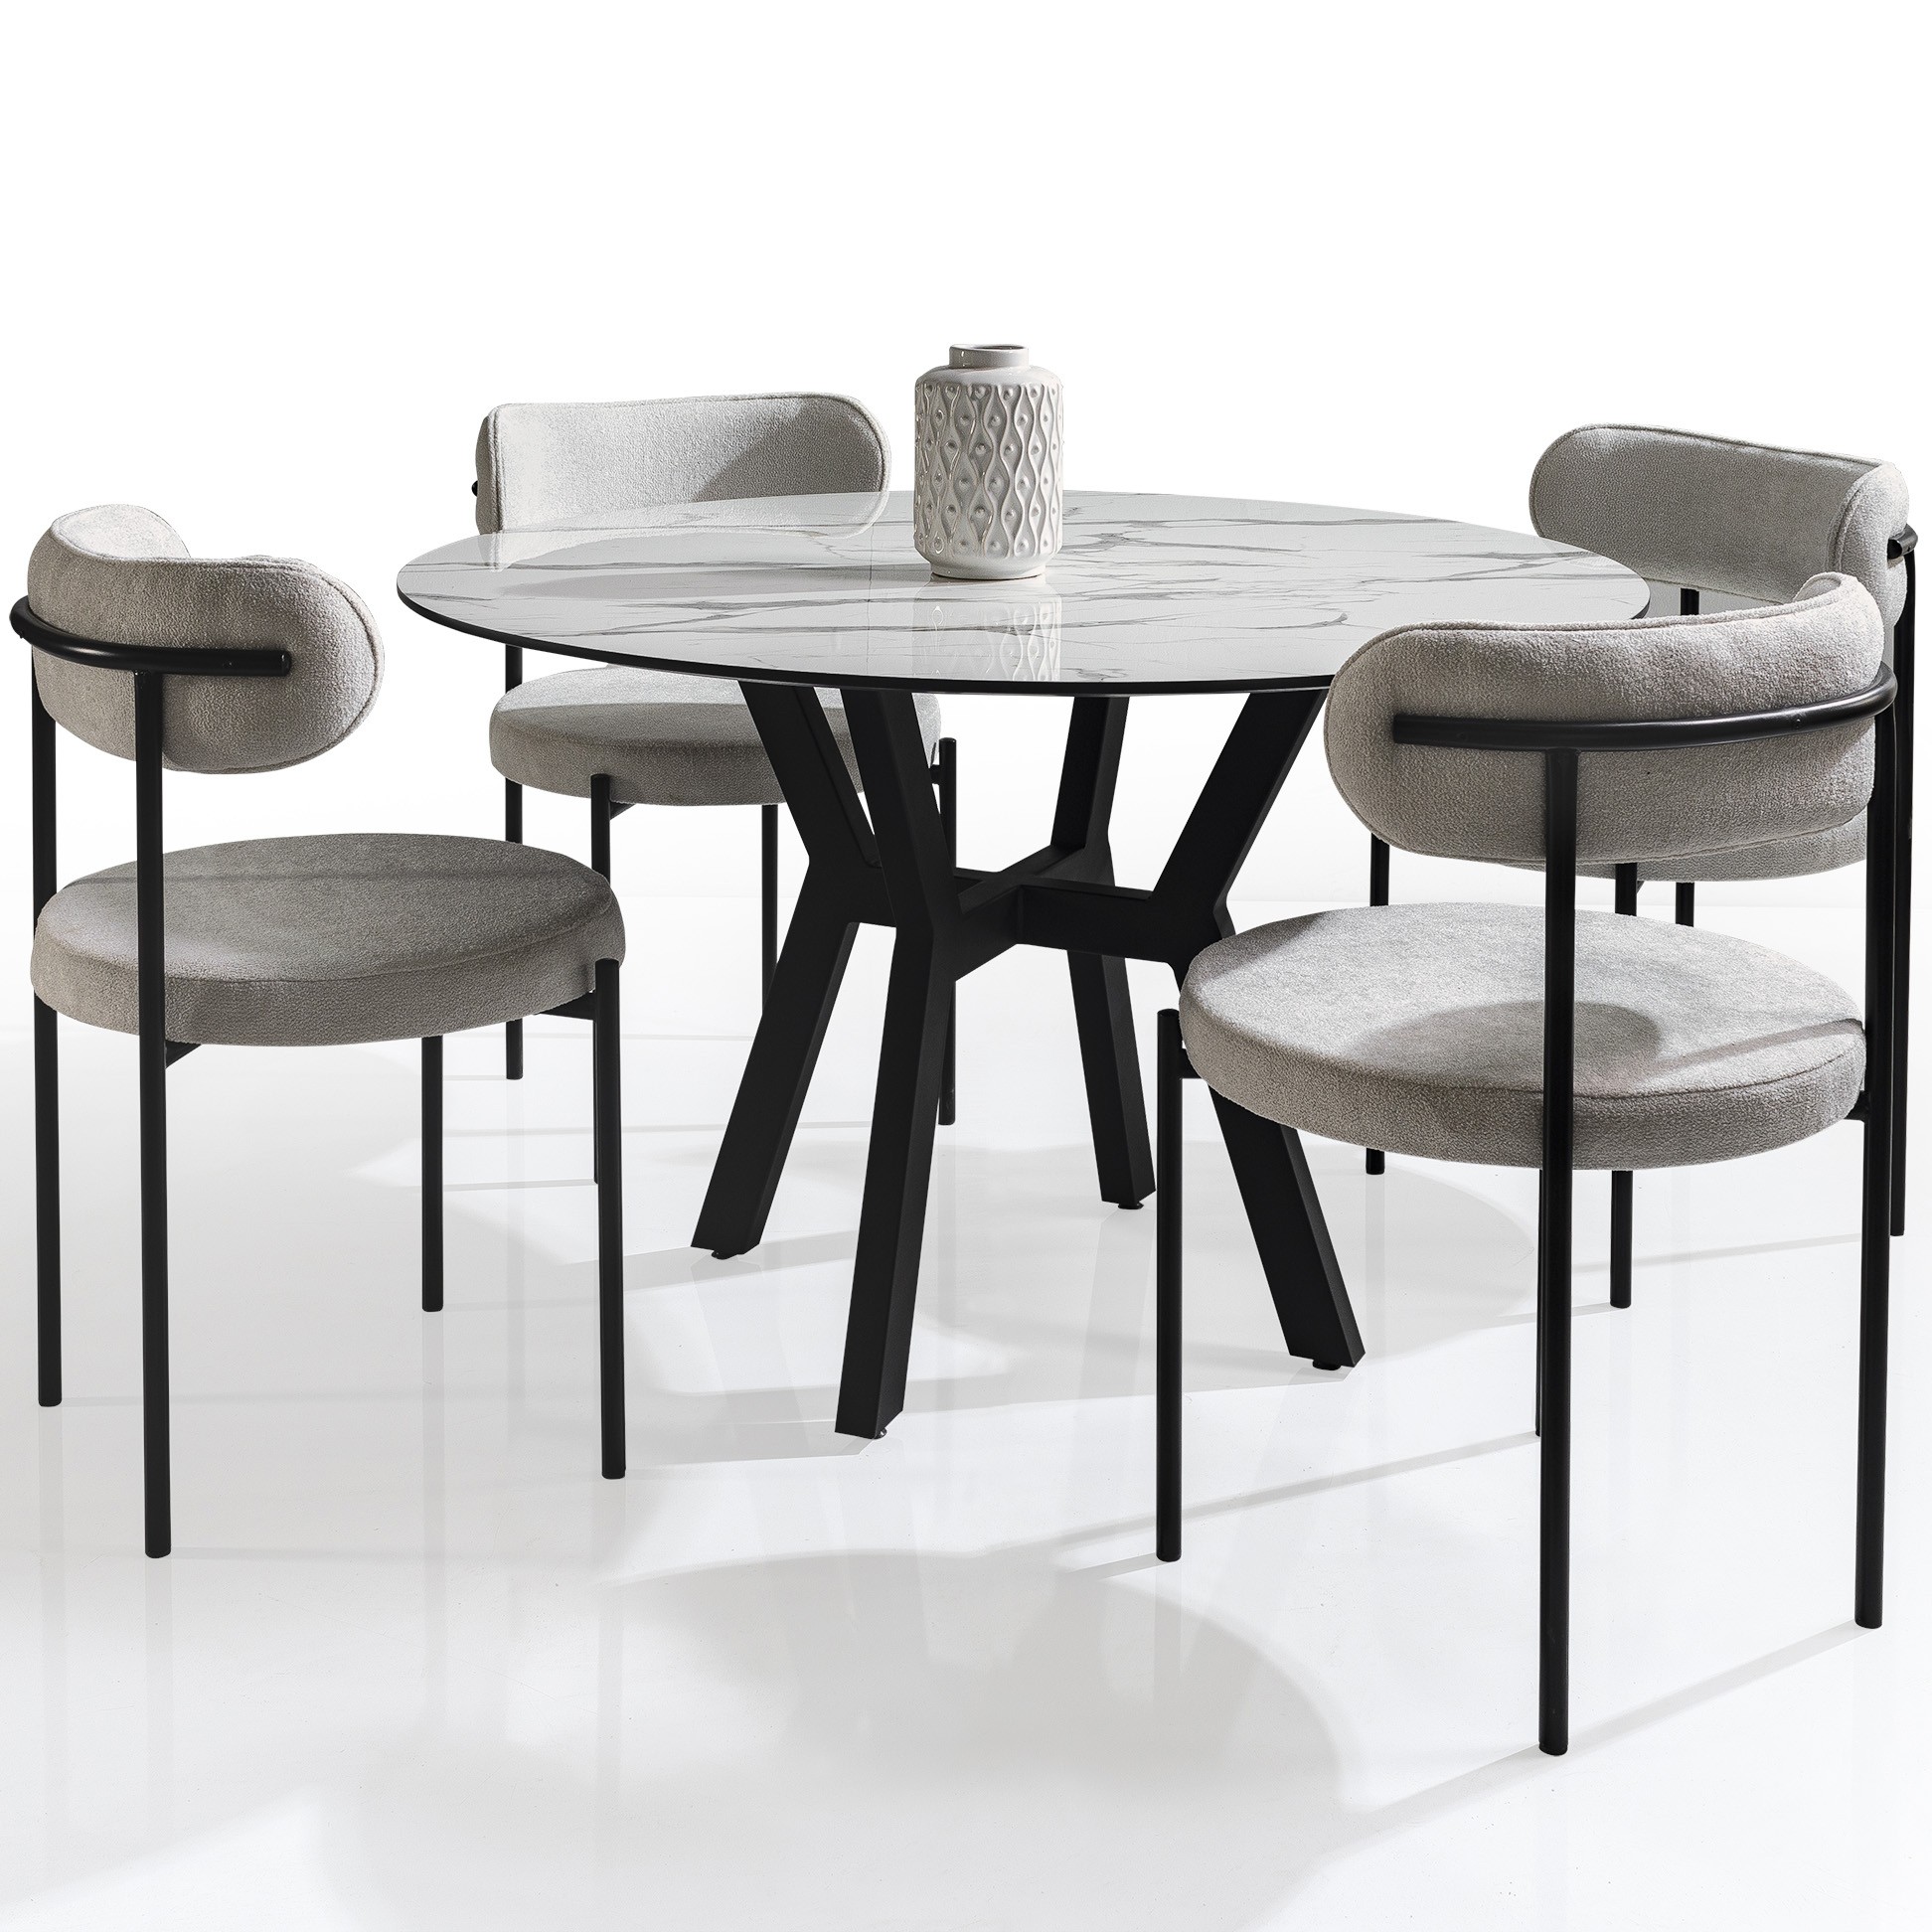 M007 Dining Table